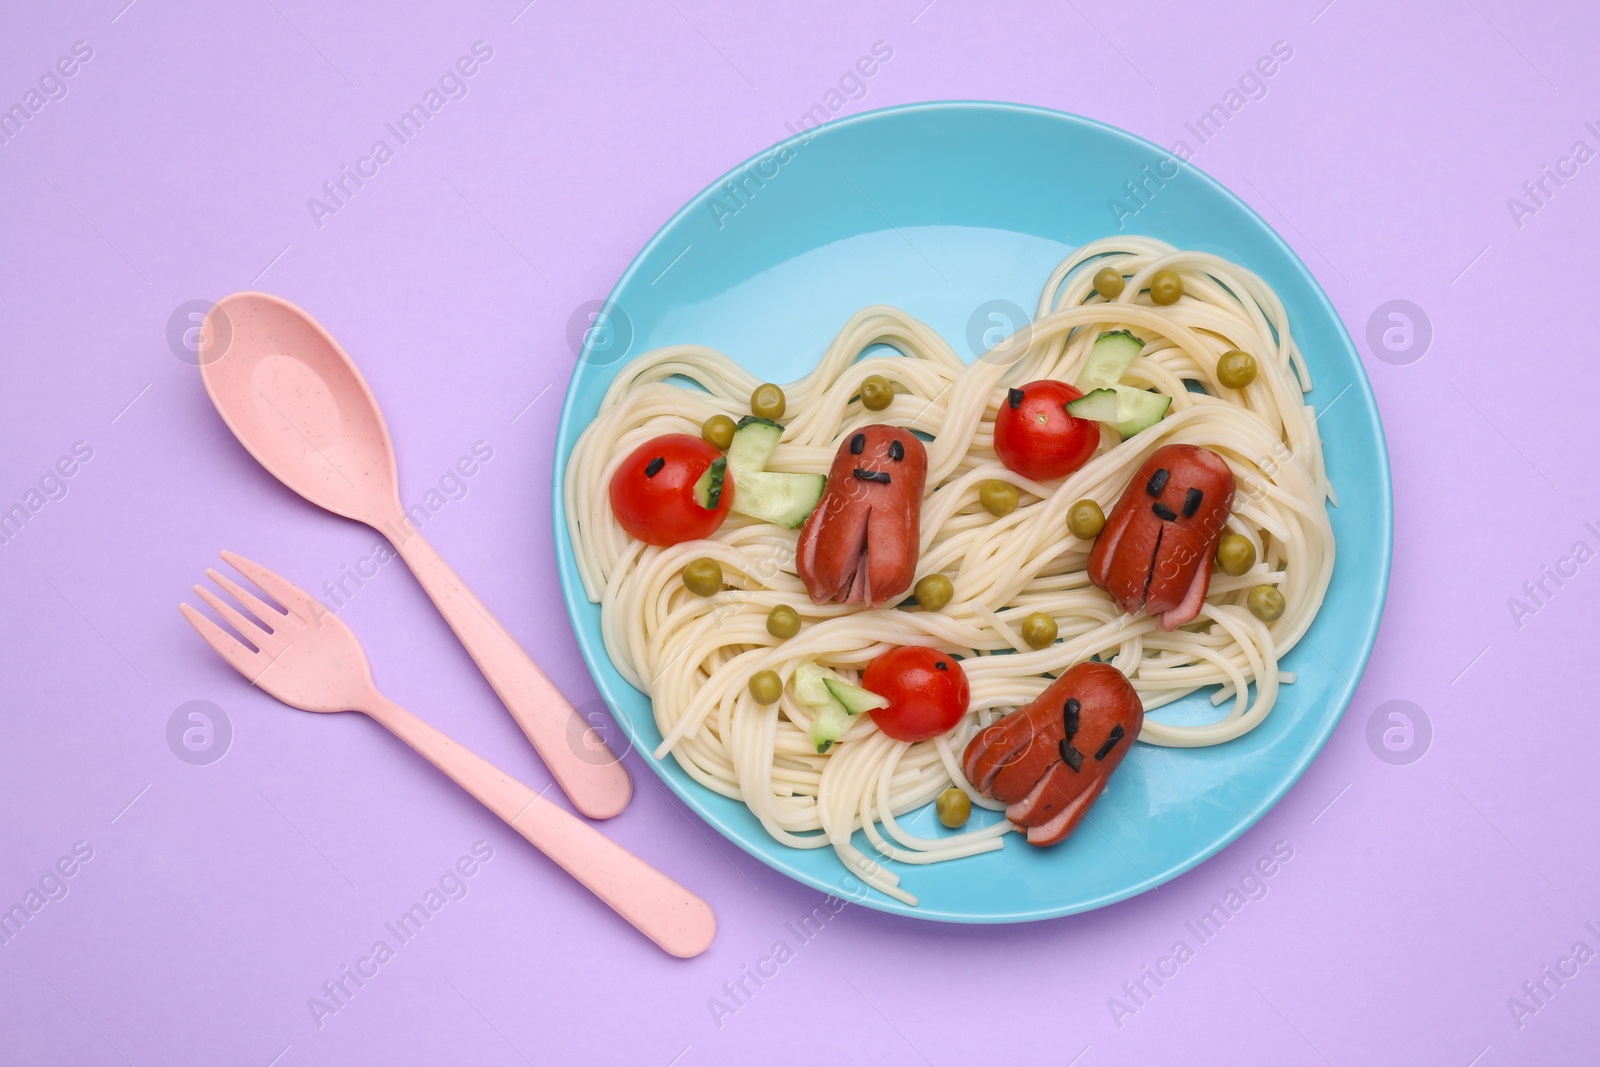 Photo of Creative serving for kids. Plate with cute octopuses made of sausages, pasta and vegetables on violet table, flat lay